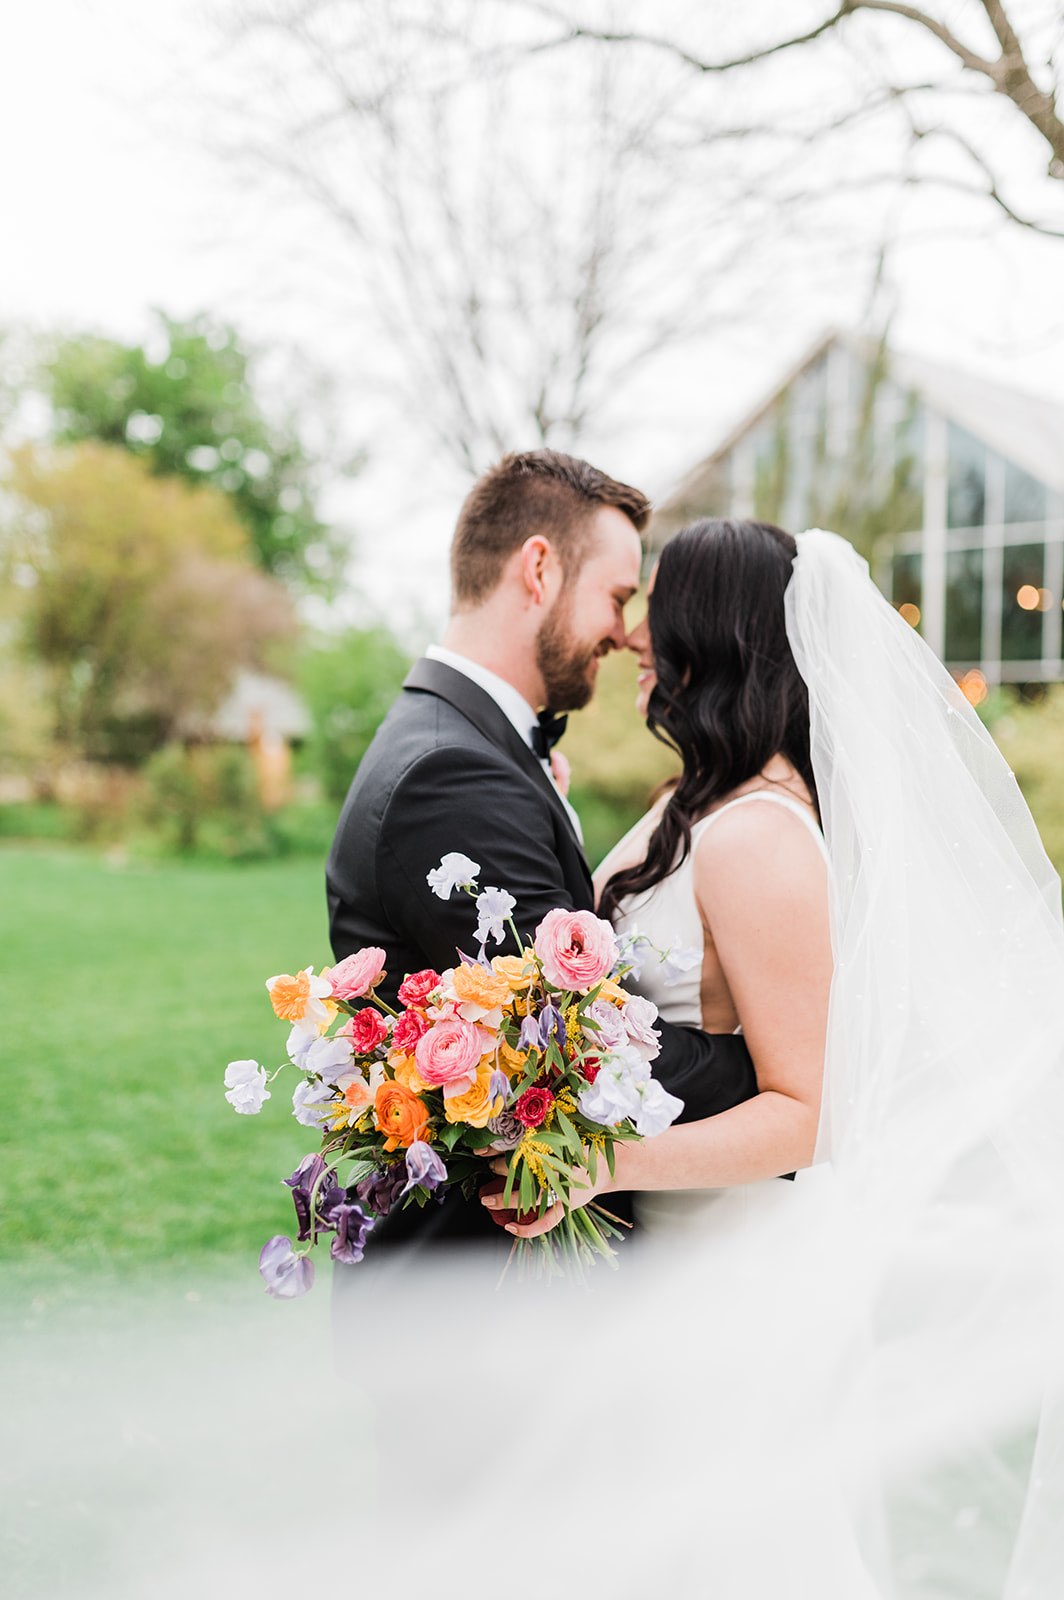 Newlyweds with colorful bridal bouquet